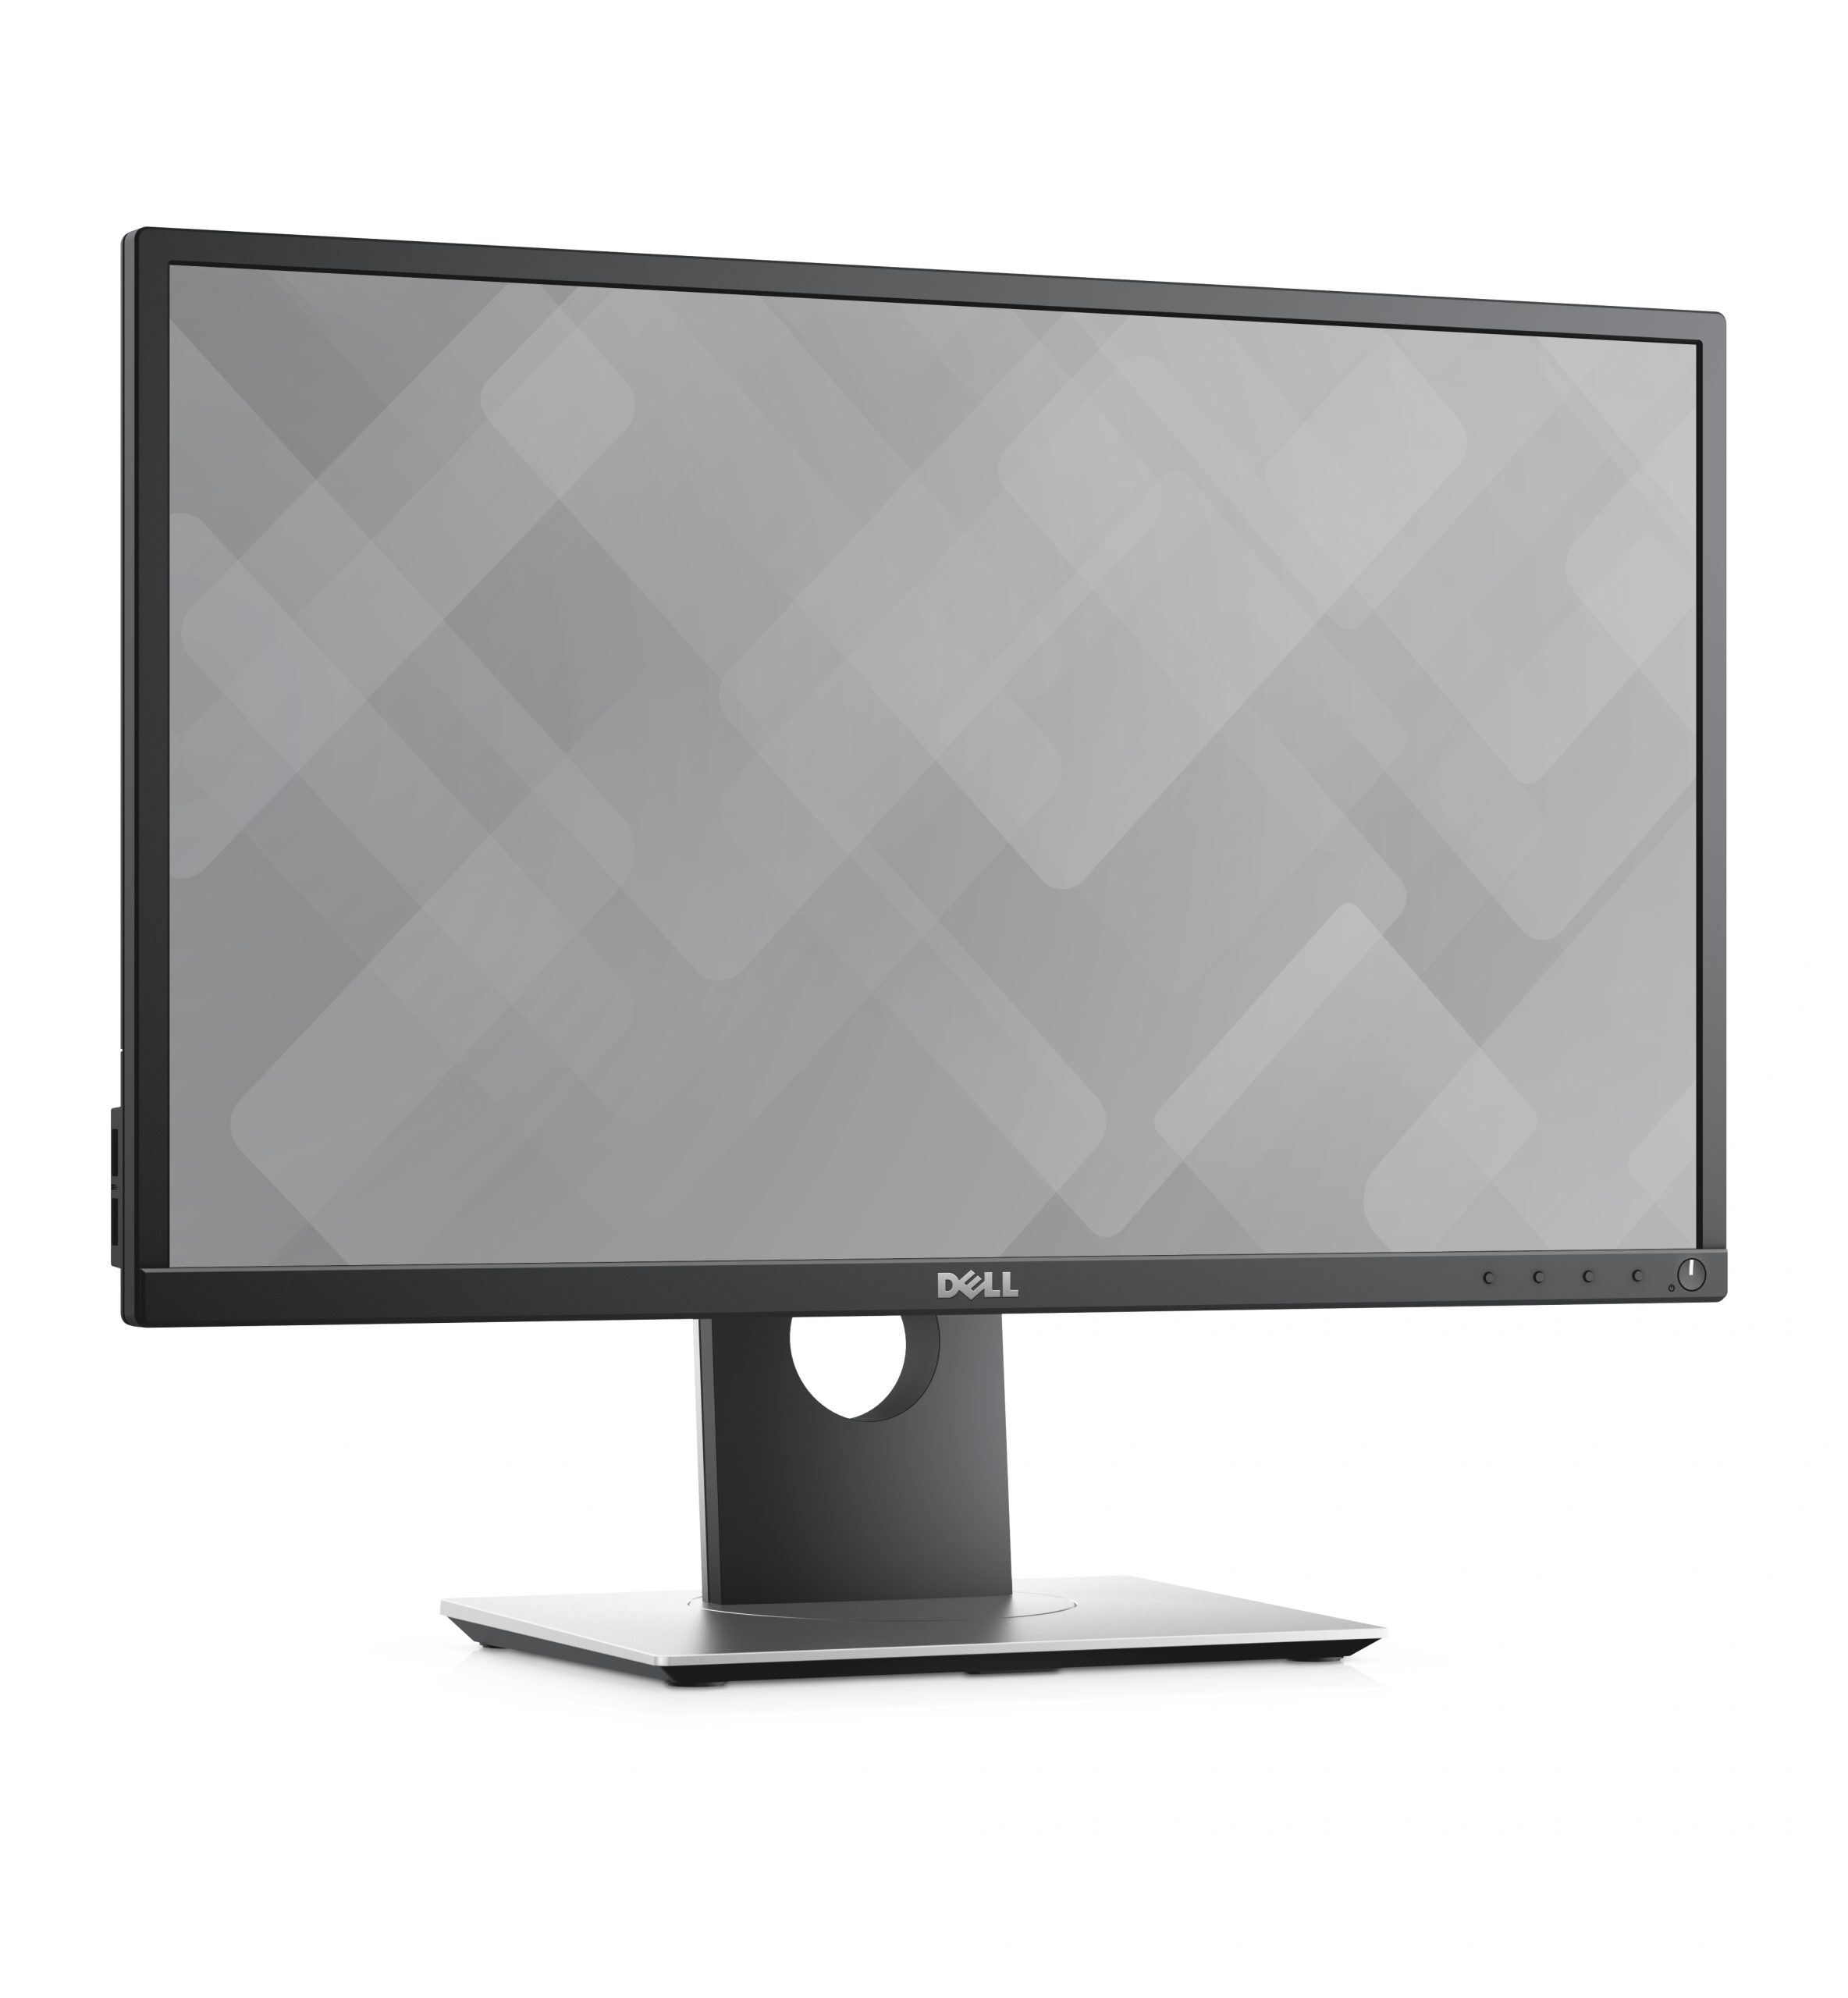 Dell P2317H IPS LED Monitor 23